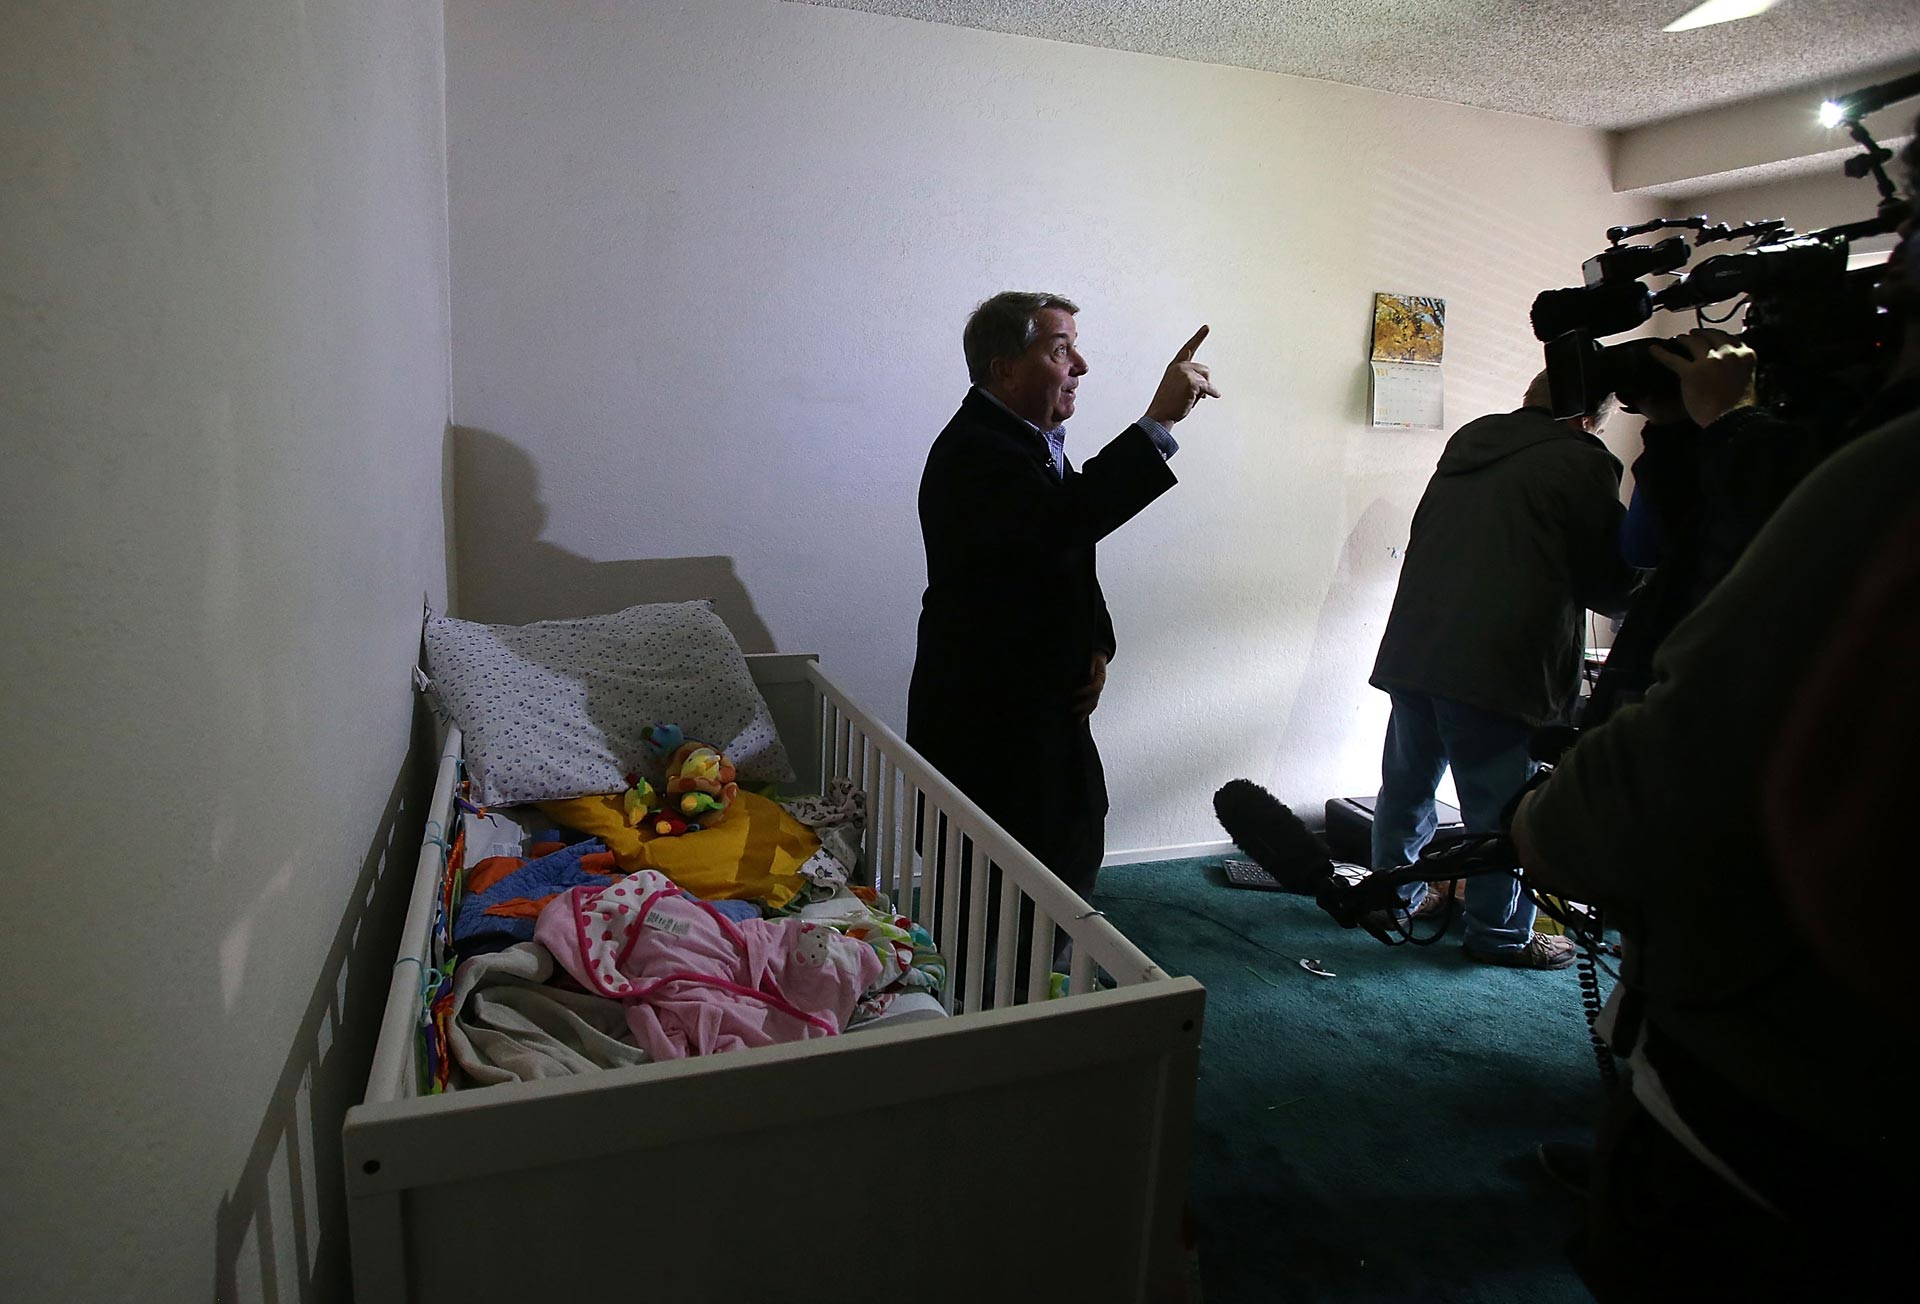 A reporter does a live shot inside the home of shooting suspect Syed Farook on Dec. 4, 2015 in San Bernardino.